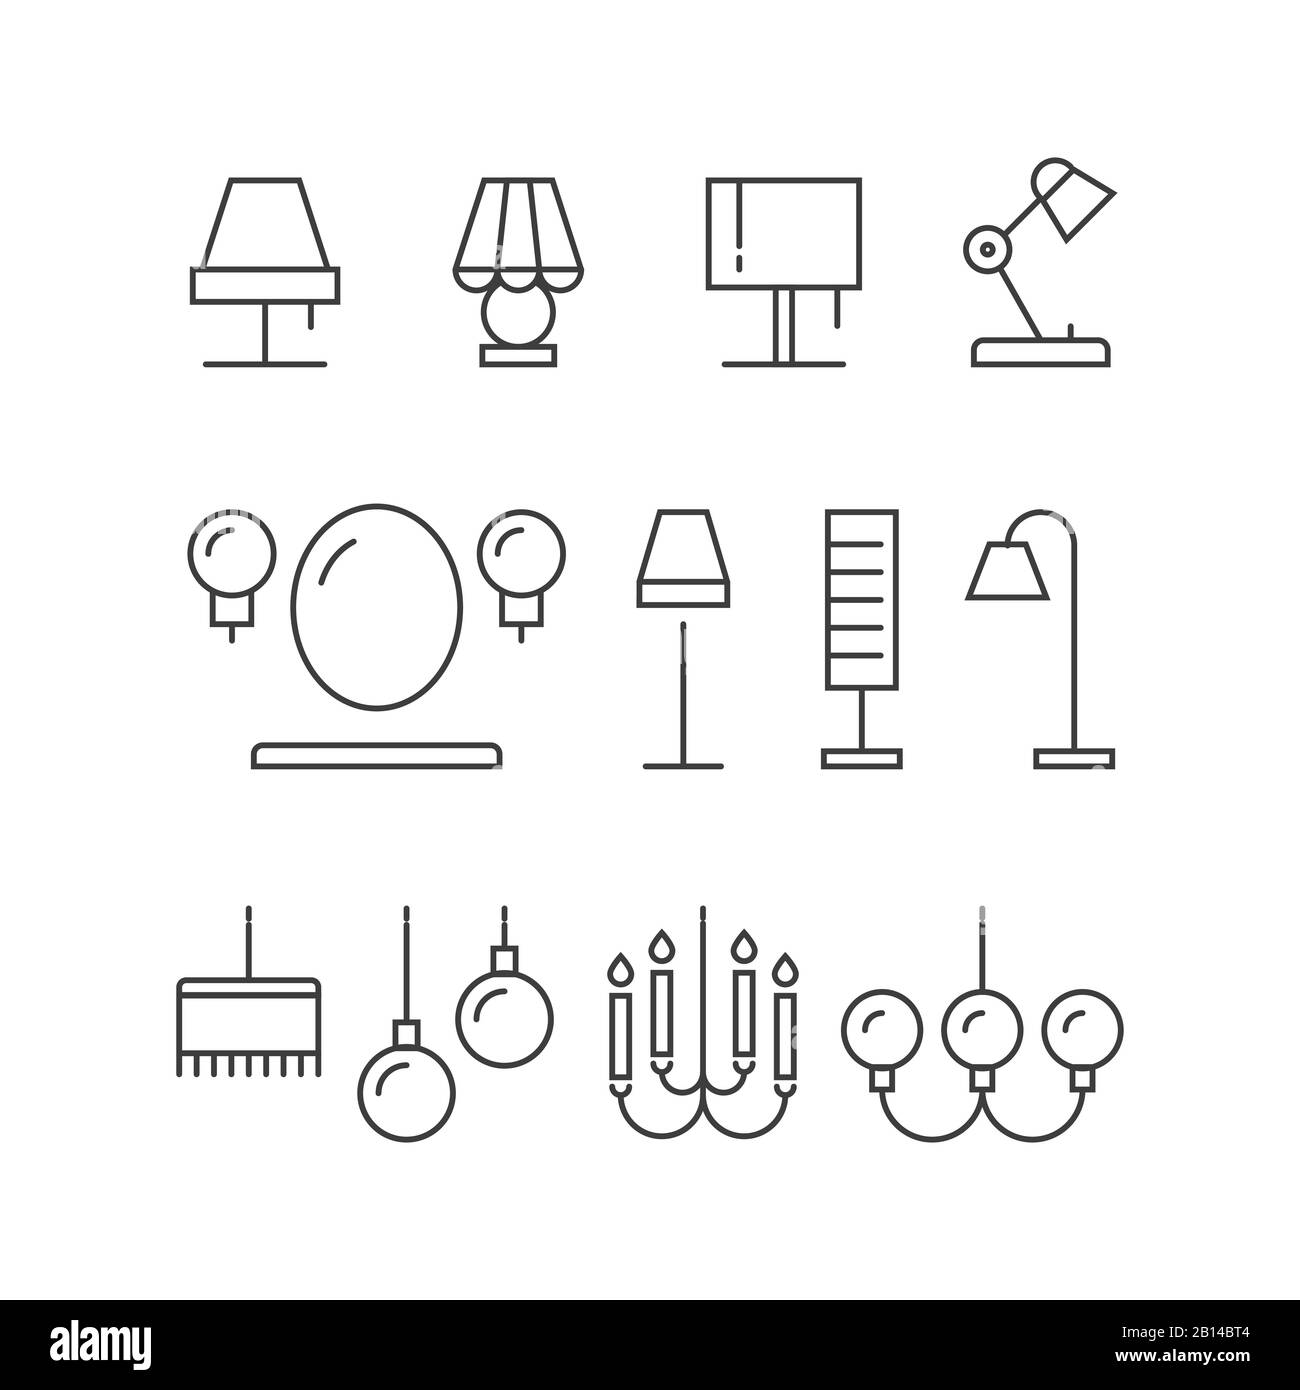 Lighting icons collection - lamps, floor lamps for home, interior, vector illustration Stock Vector